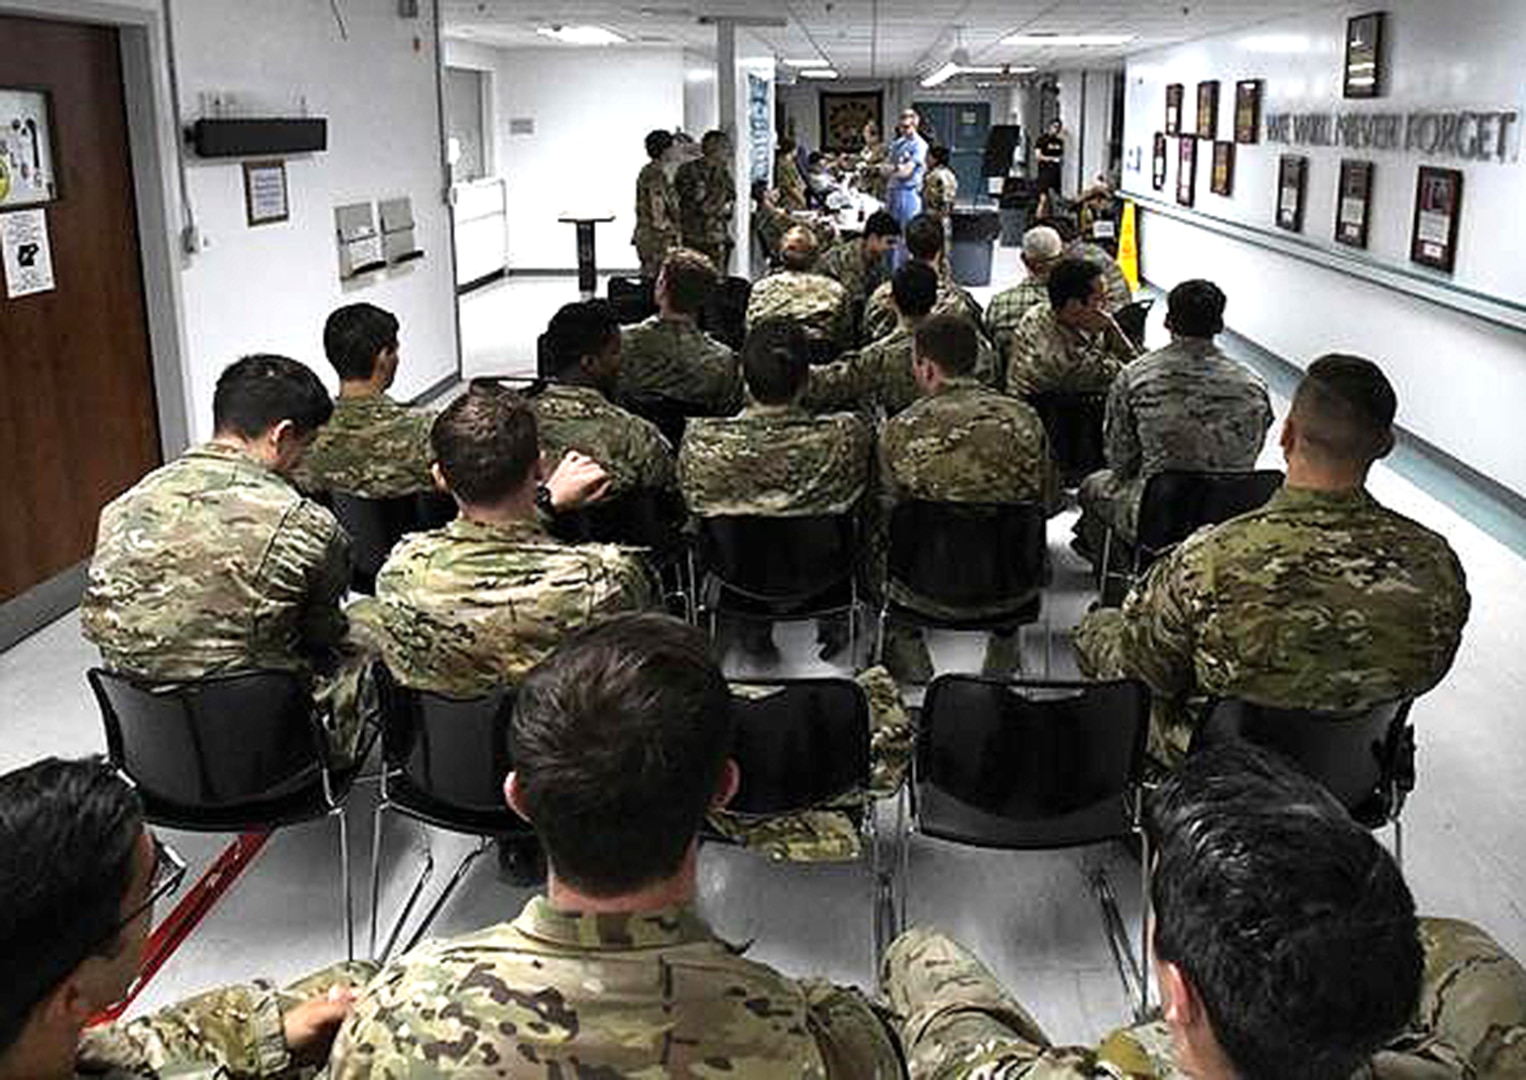 Service members wait in line to donate blood at Craig Joint Theater Hospital at Bagram Airfield, Afghanistan, Aug. 18, 2019, as part of a "walking blood bank" for a fellow service member being transferred to Brooke Army Medical Center in San Antonio. A request for volunteers with a specific blood type was filled within minutes, providing fresh whole blood to sustain the patient during the lengthy flight home.